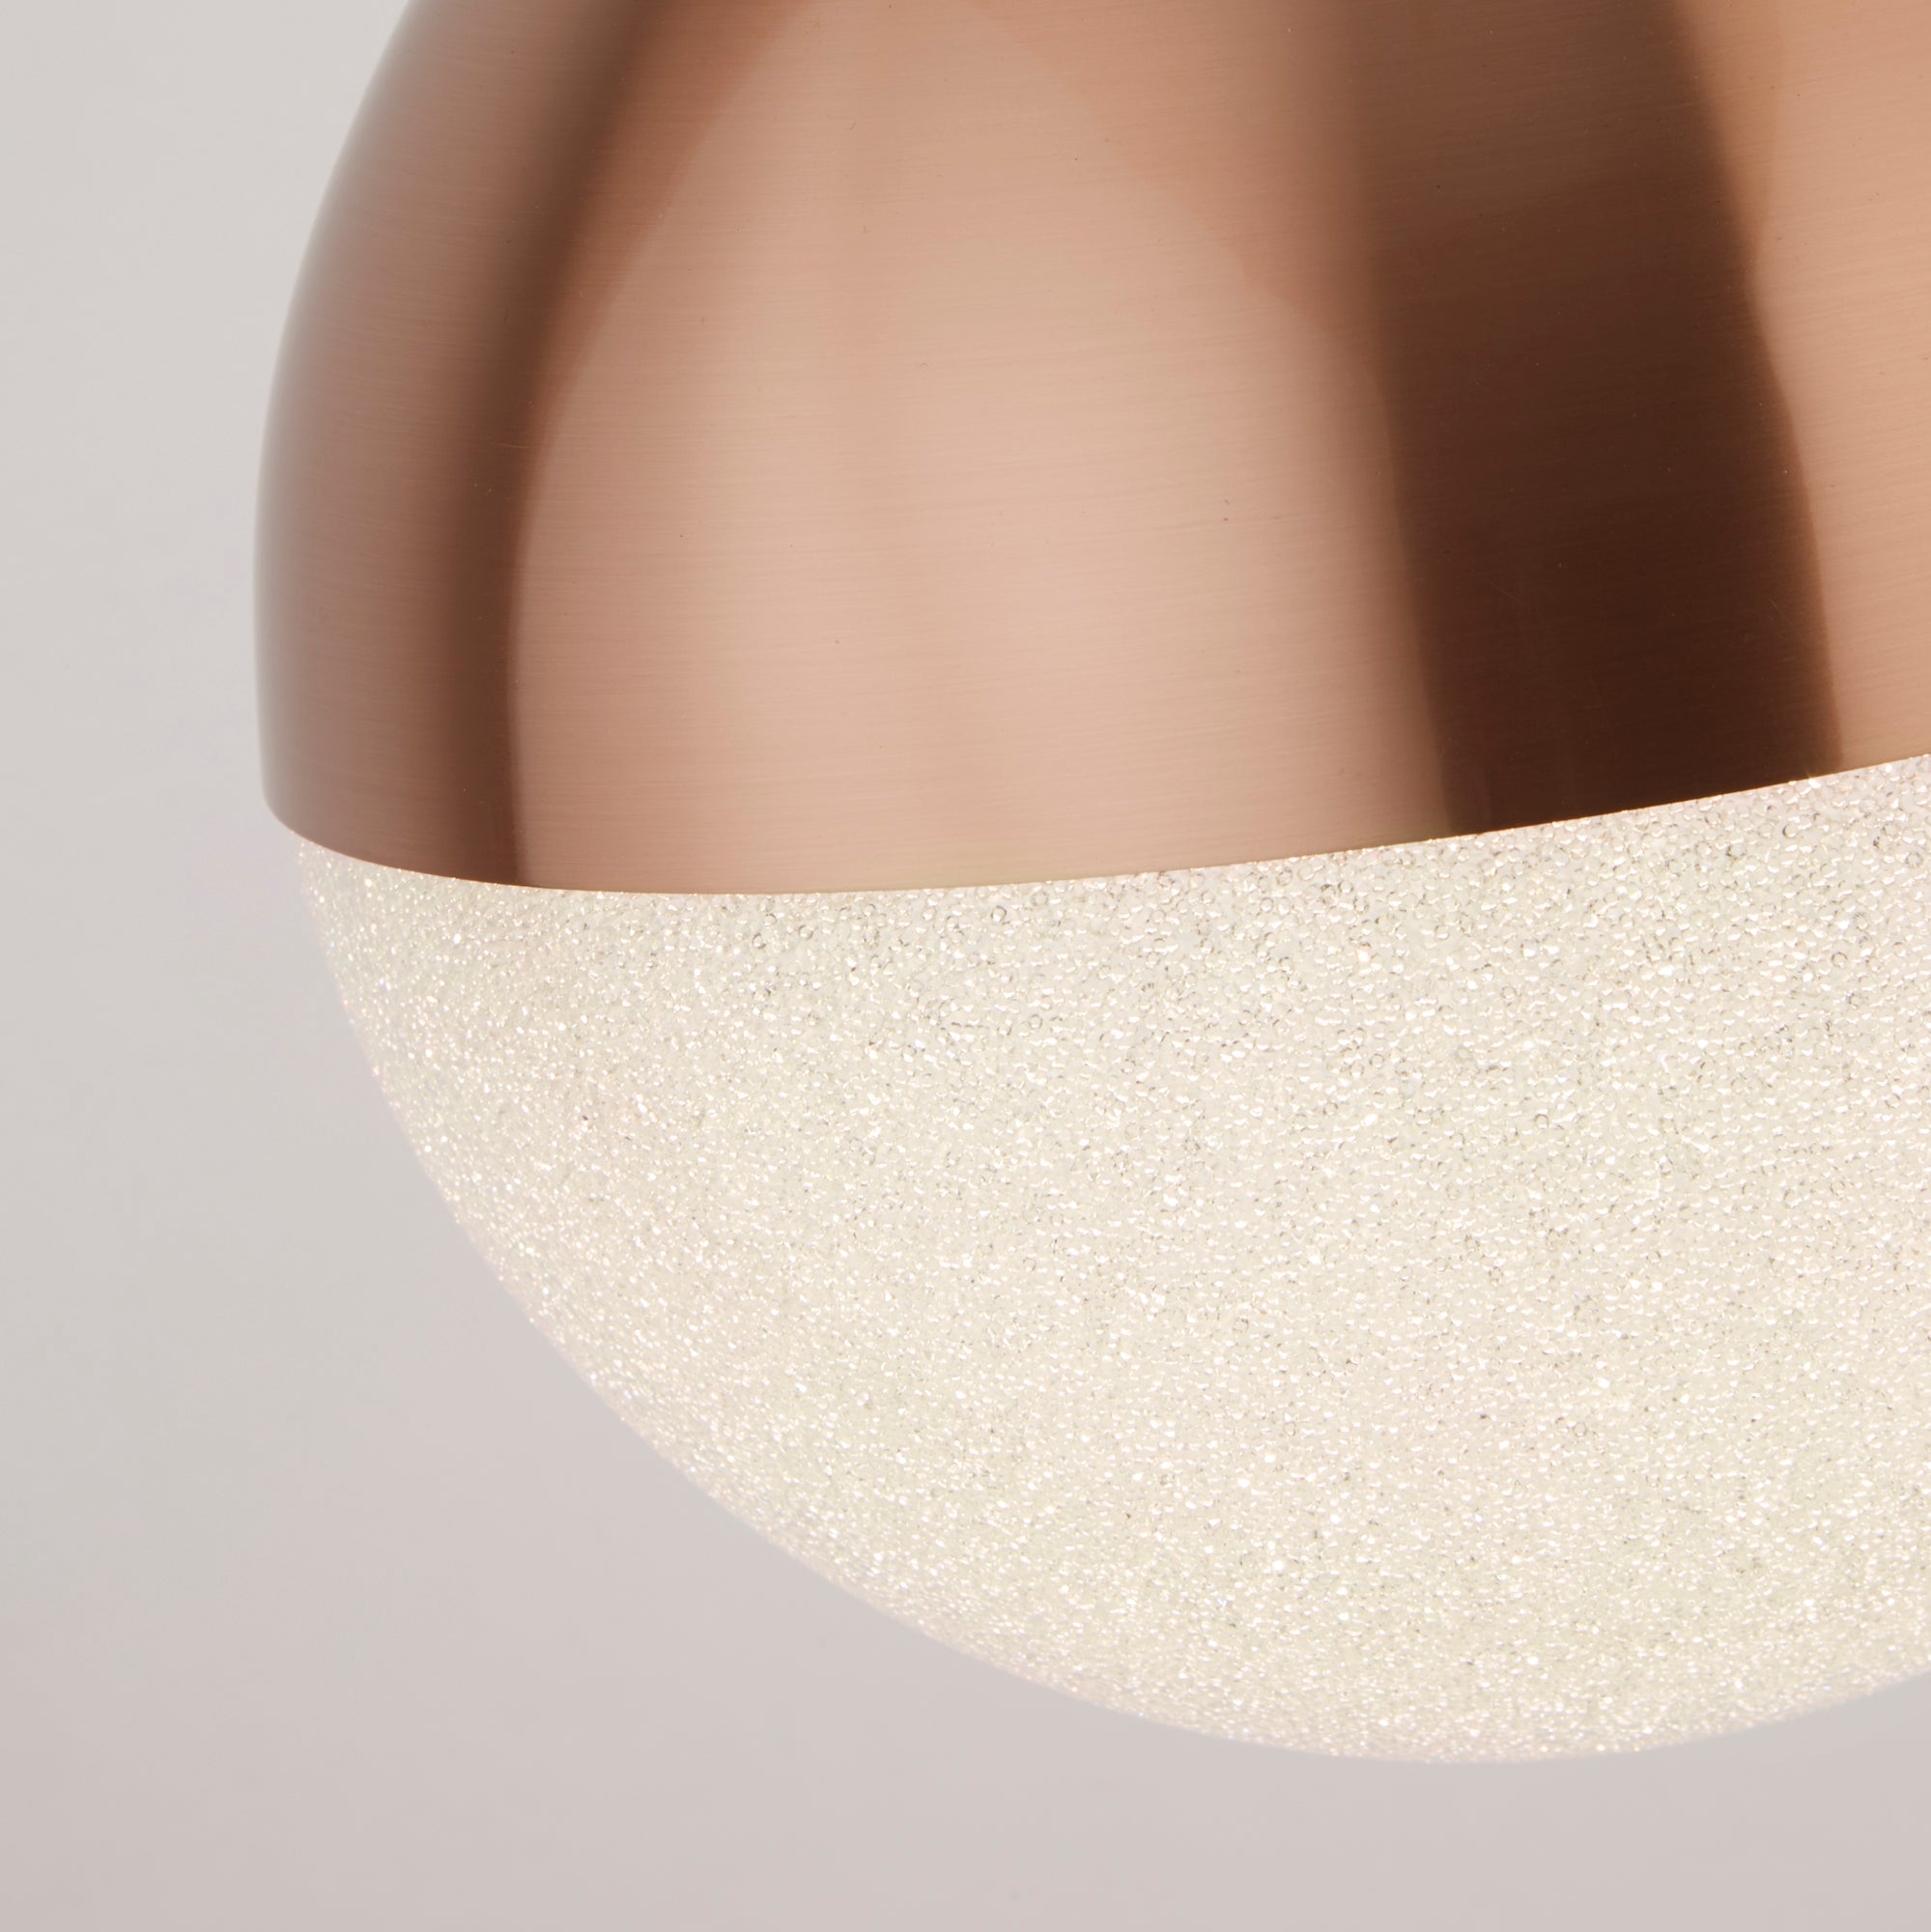 Marbles Led Pendant - Various Finishes